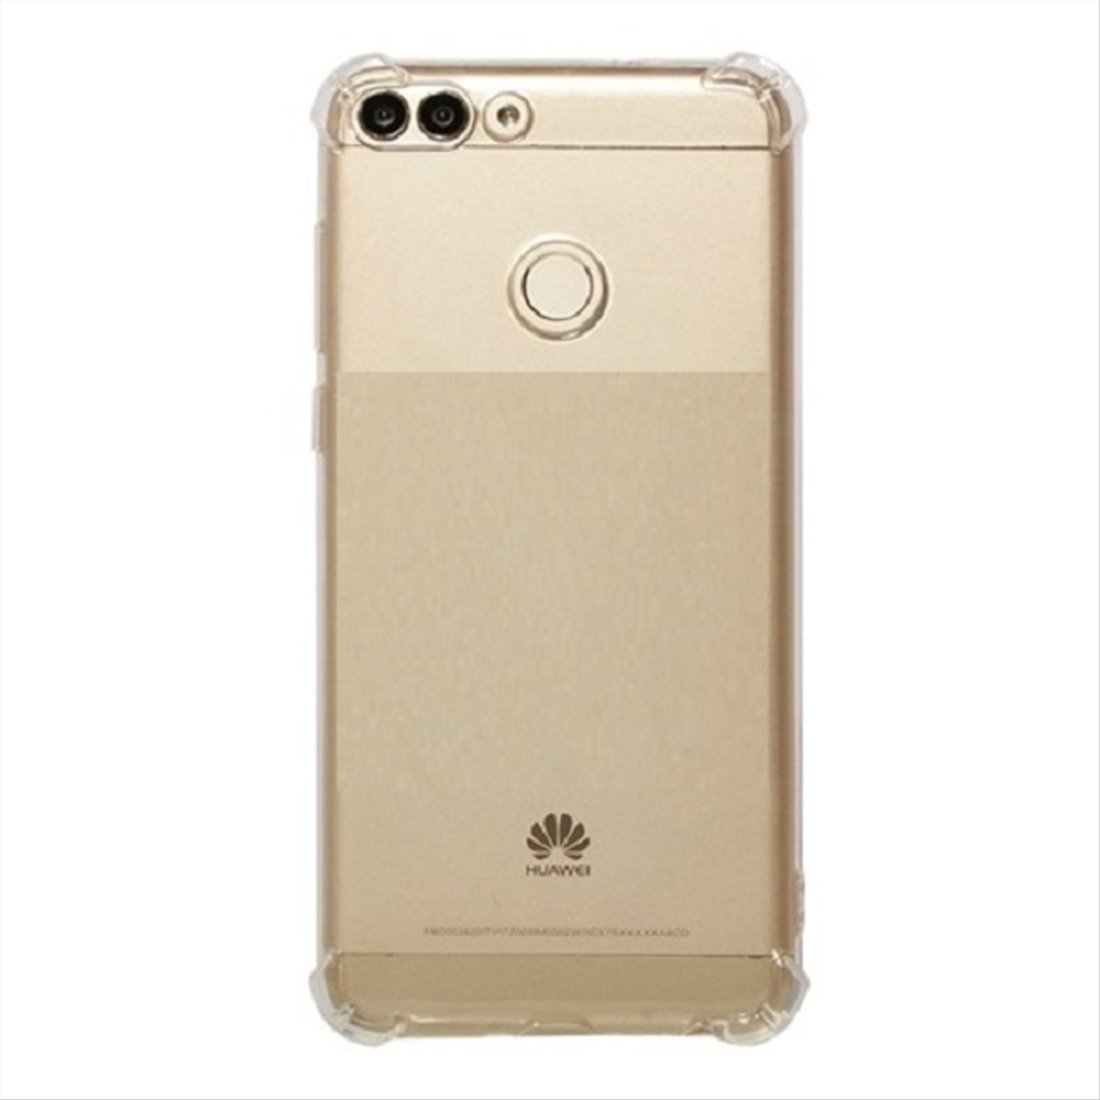 Huawei P smart silicone Transparent Back Cover Smartphone Case